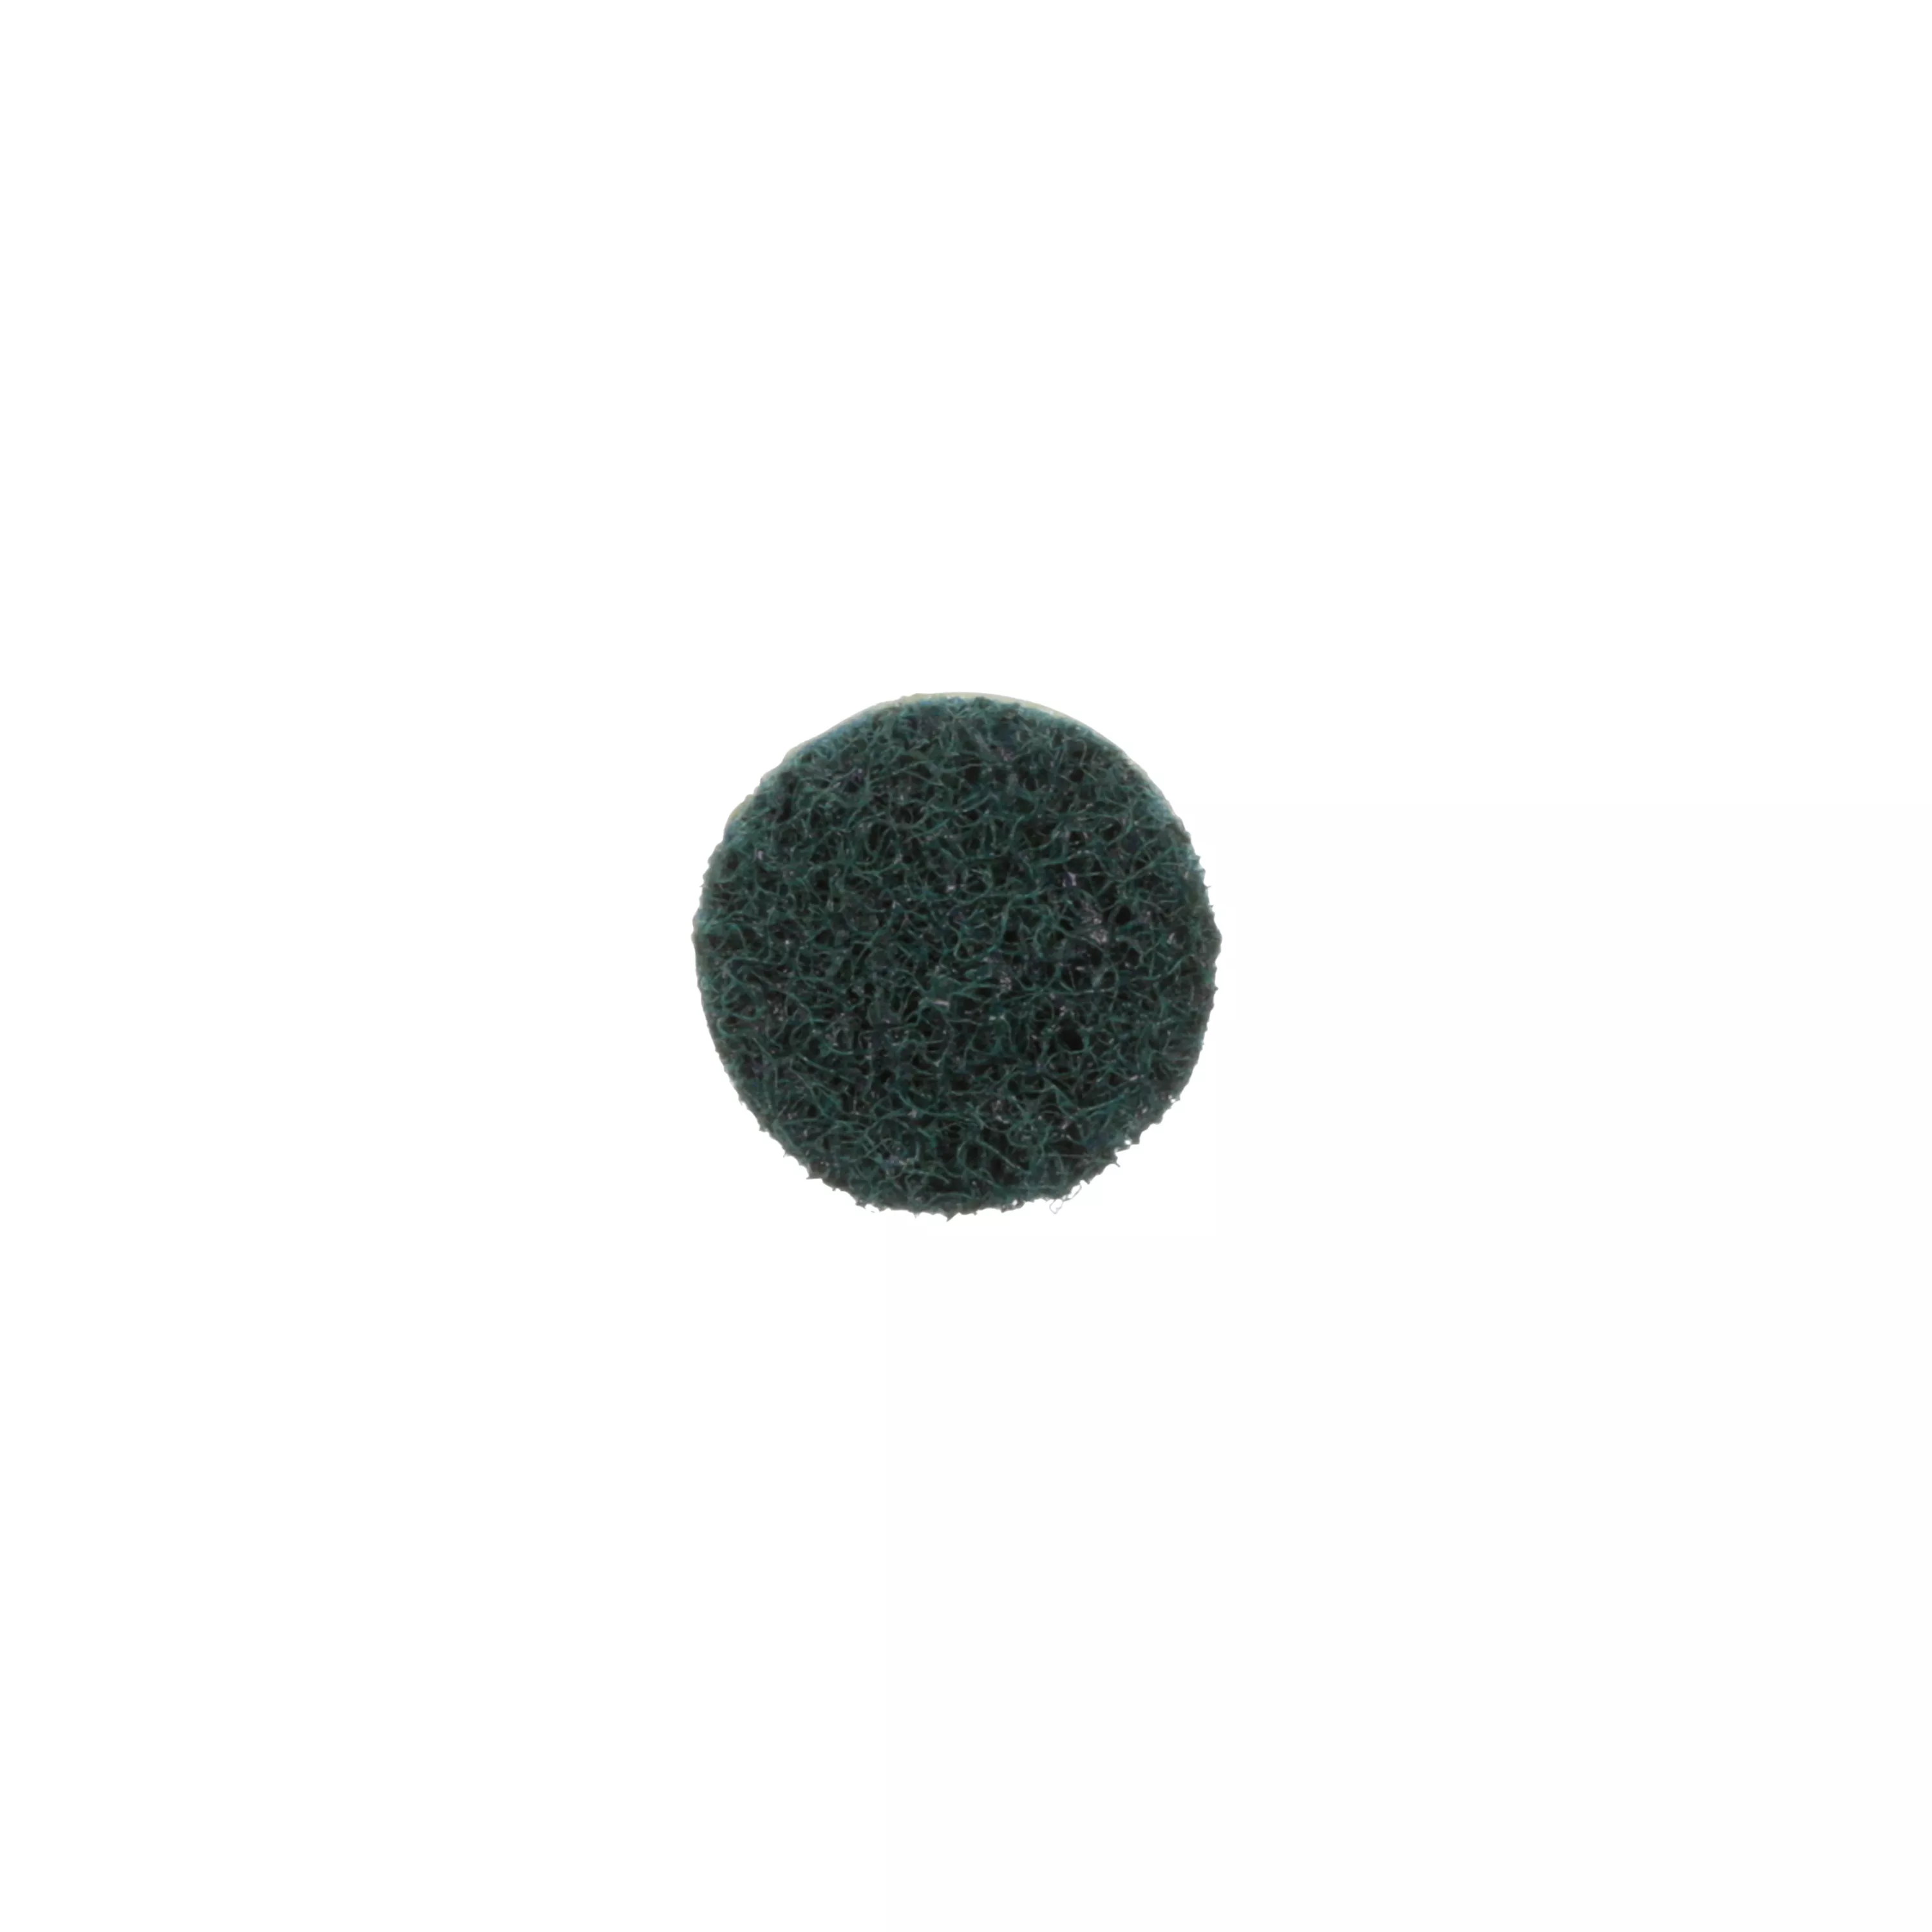 Scotch-Brite™ Roloc™ Surface Conditioning Disc, SC-DS, A/O Very Fine,
TS, 3/4 in, 50/Bag, 200 ea/Case